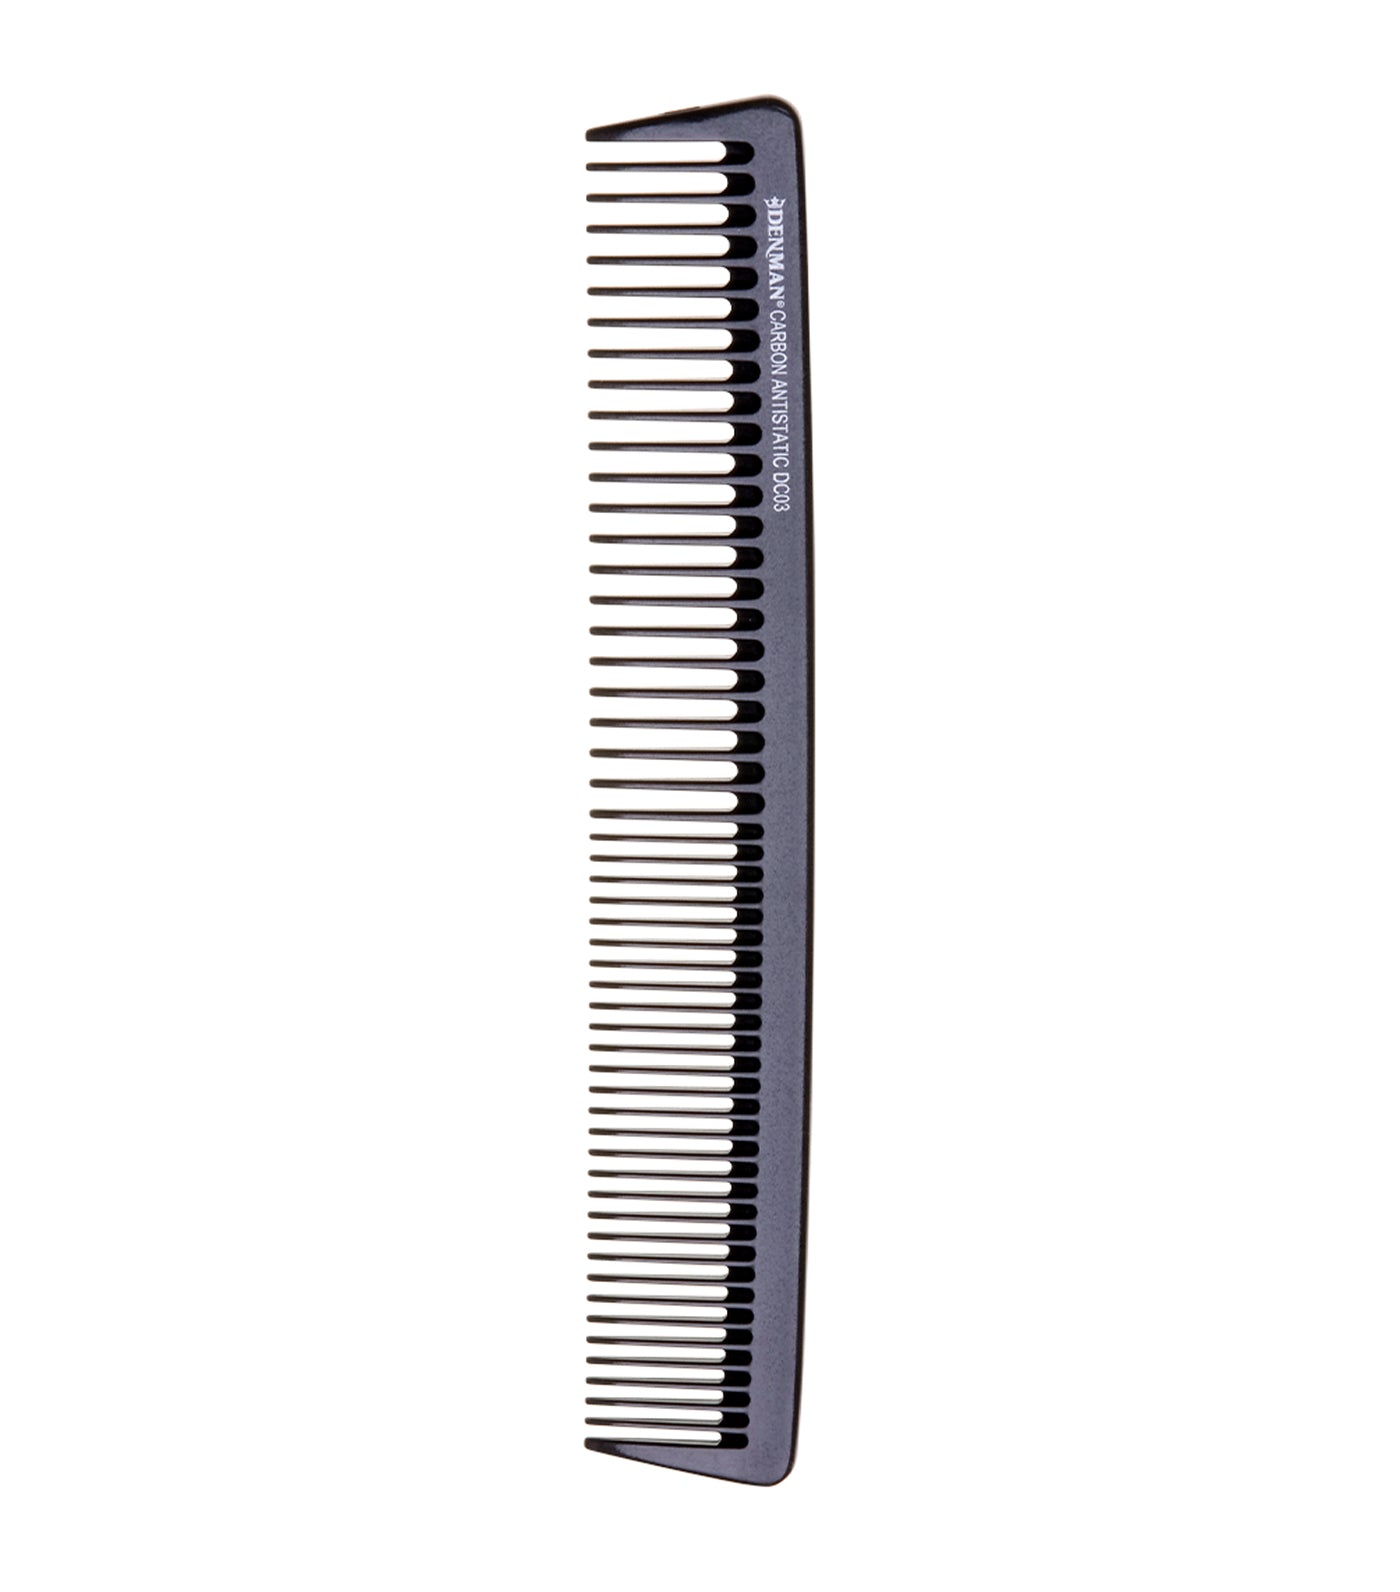 DC03 Small Cutting Comb 193MM